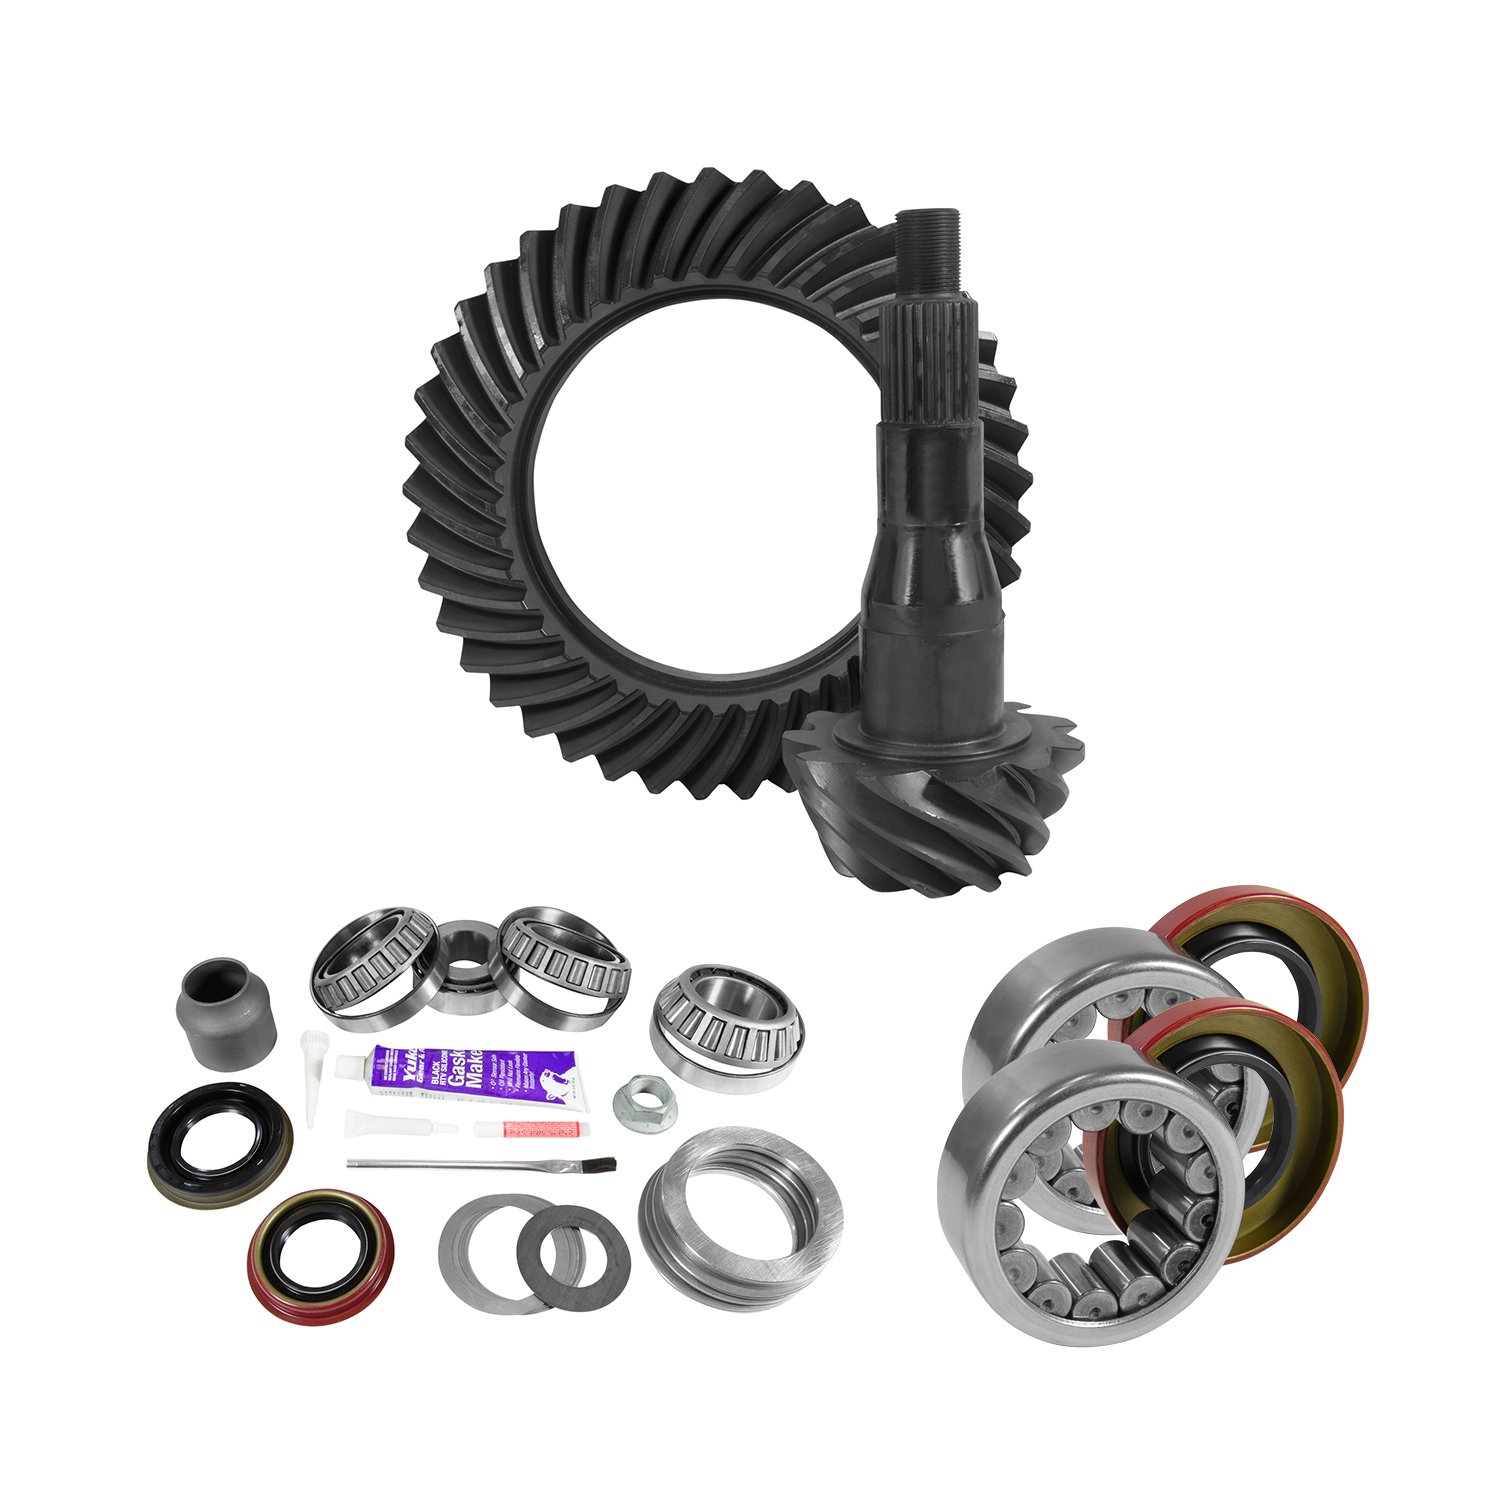 USA Standard 10807 9.75 in. Ford 4.11 Rear Ring & Pinion Install Kit, 2.99 in. Od Axle Bearings & Seals